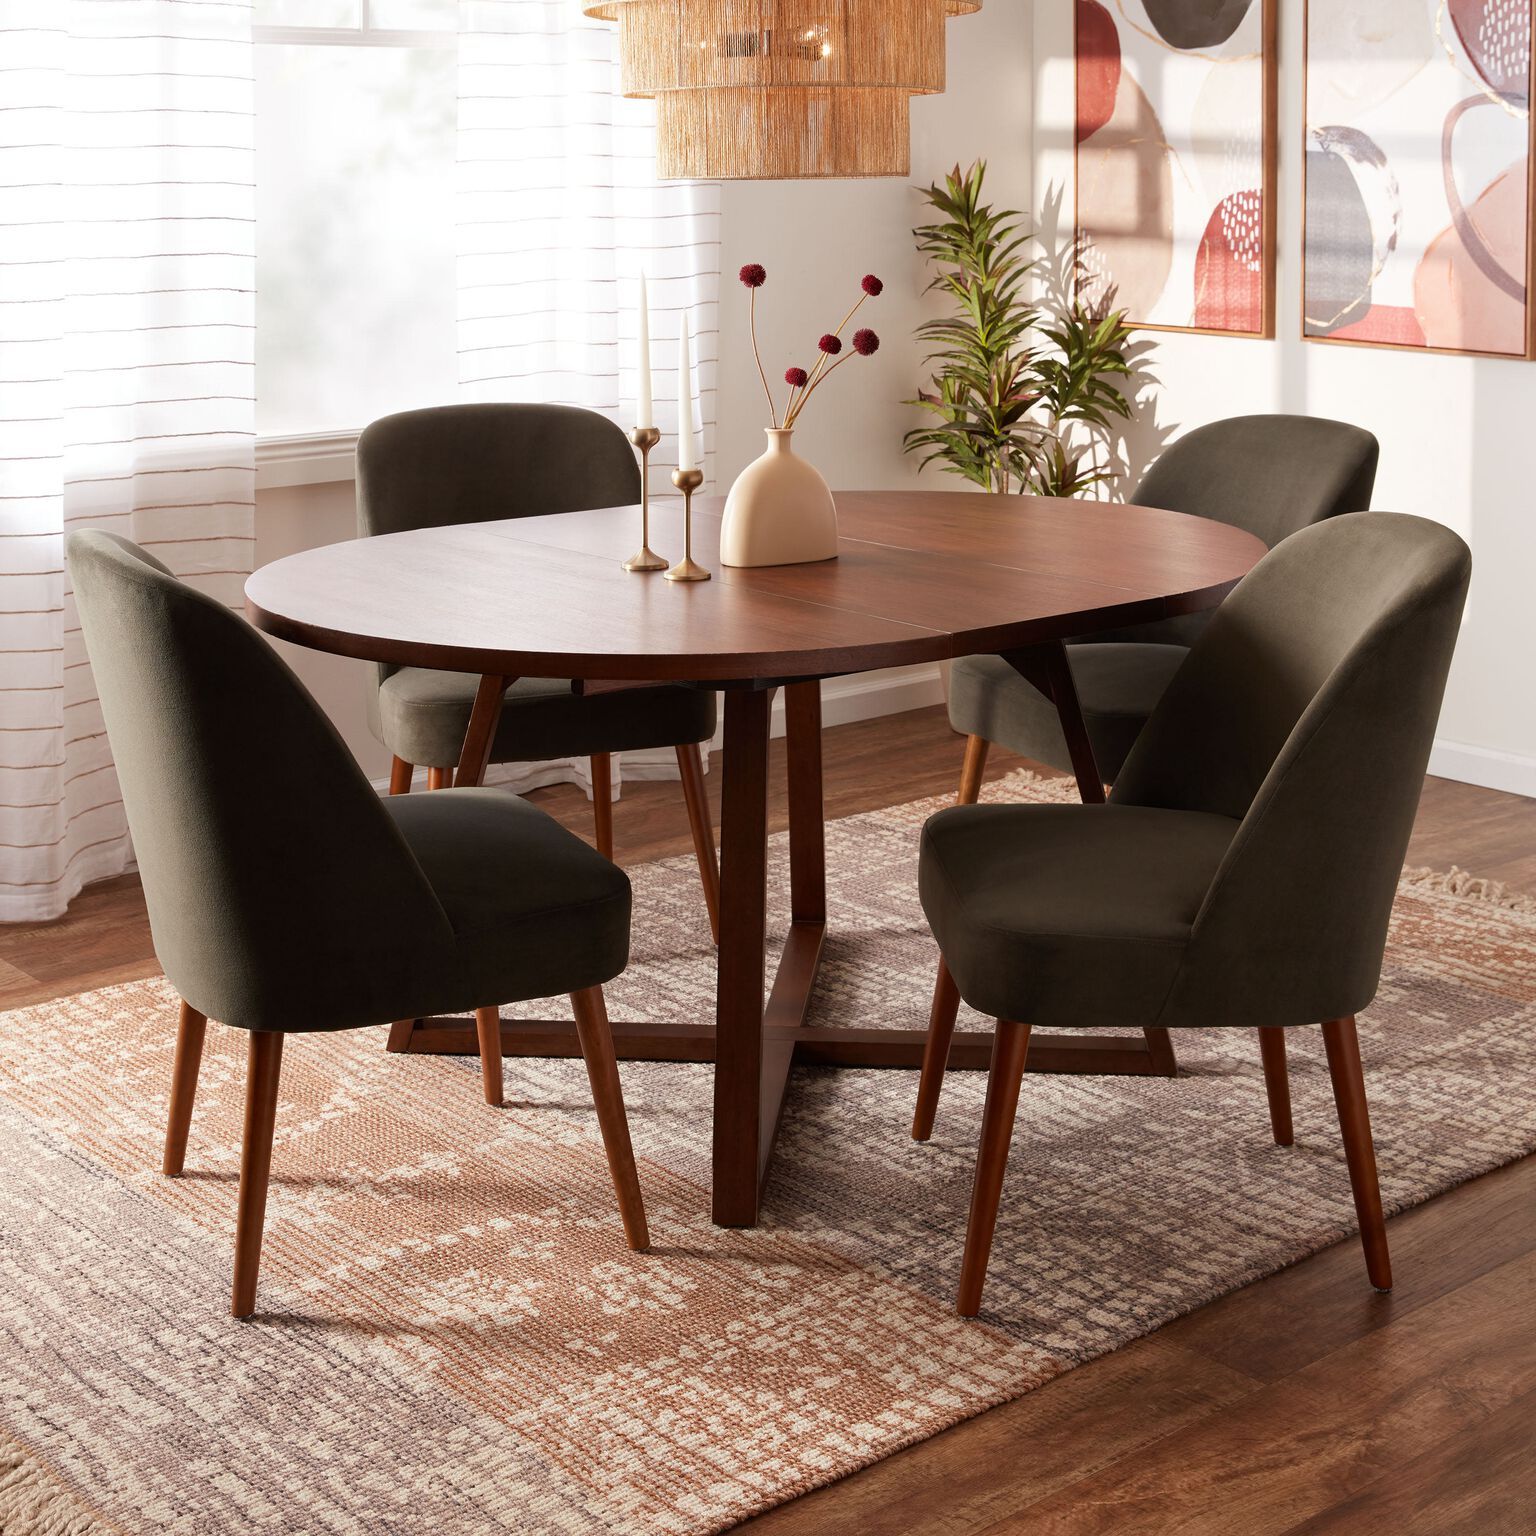 Enhance your kitchen with some round
dining room tables